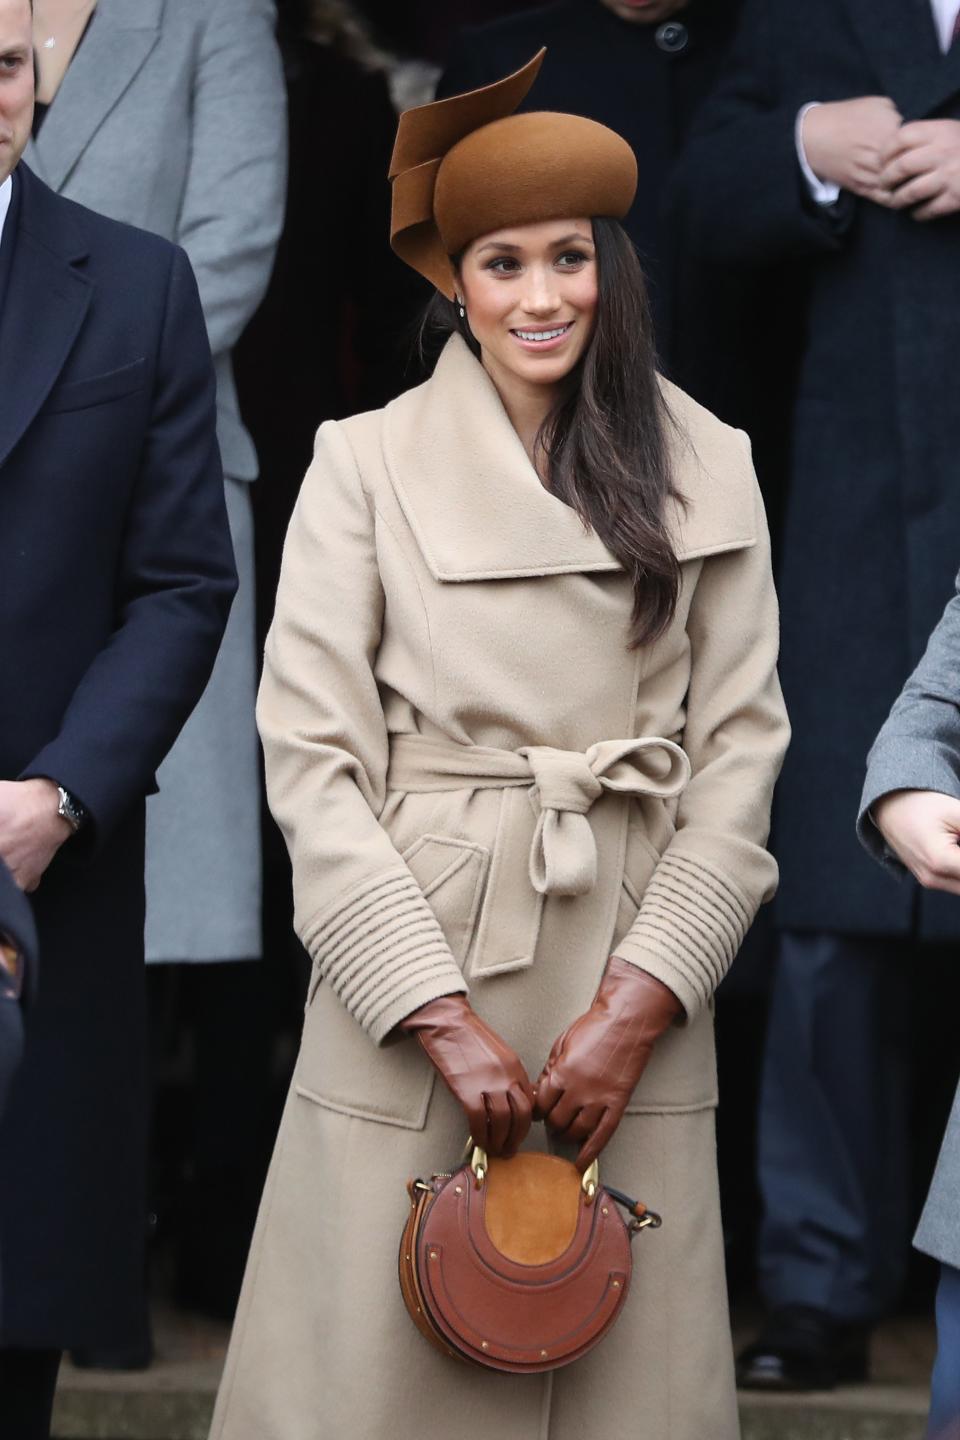 Meghan Markle has the power to change what it looks like and ultimately means to be a princess in 2018. Here's why.